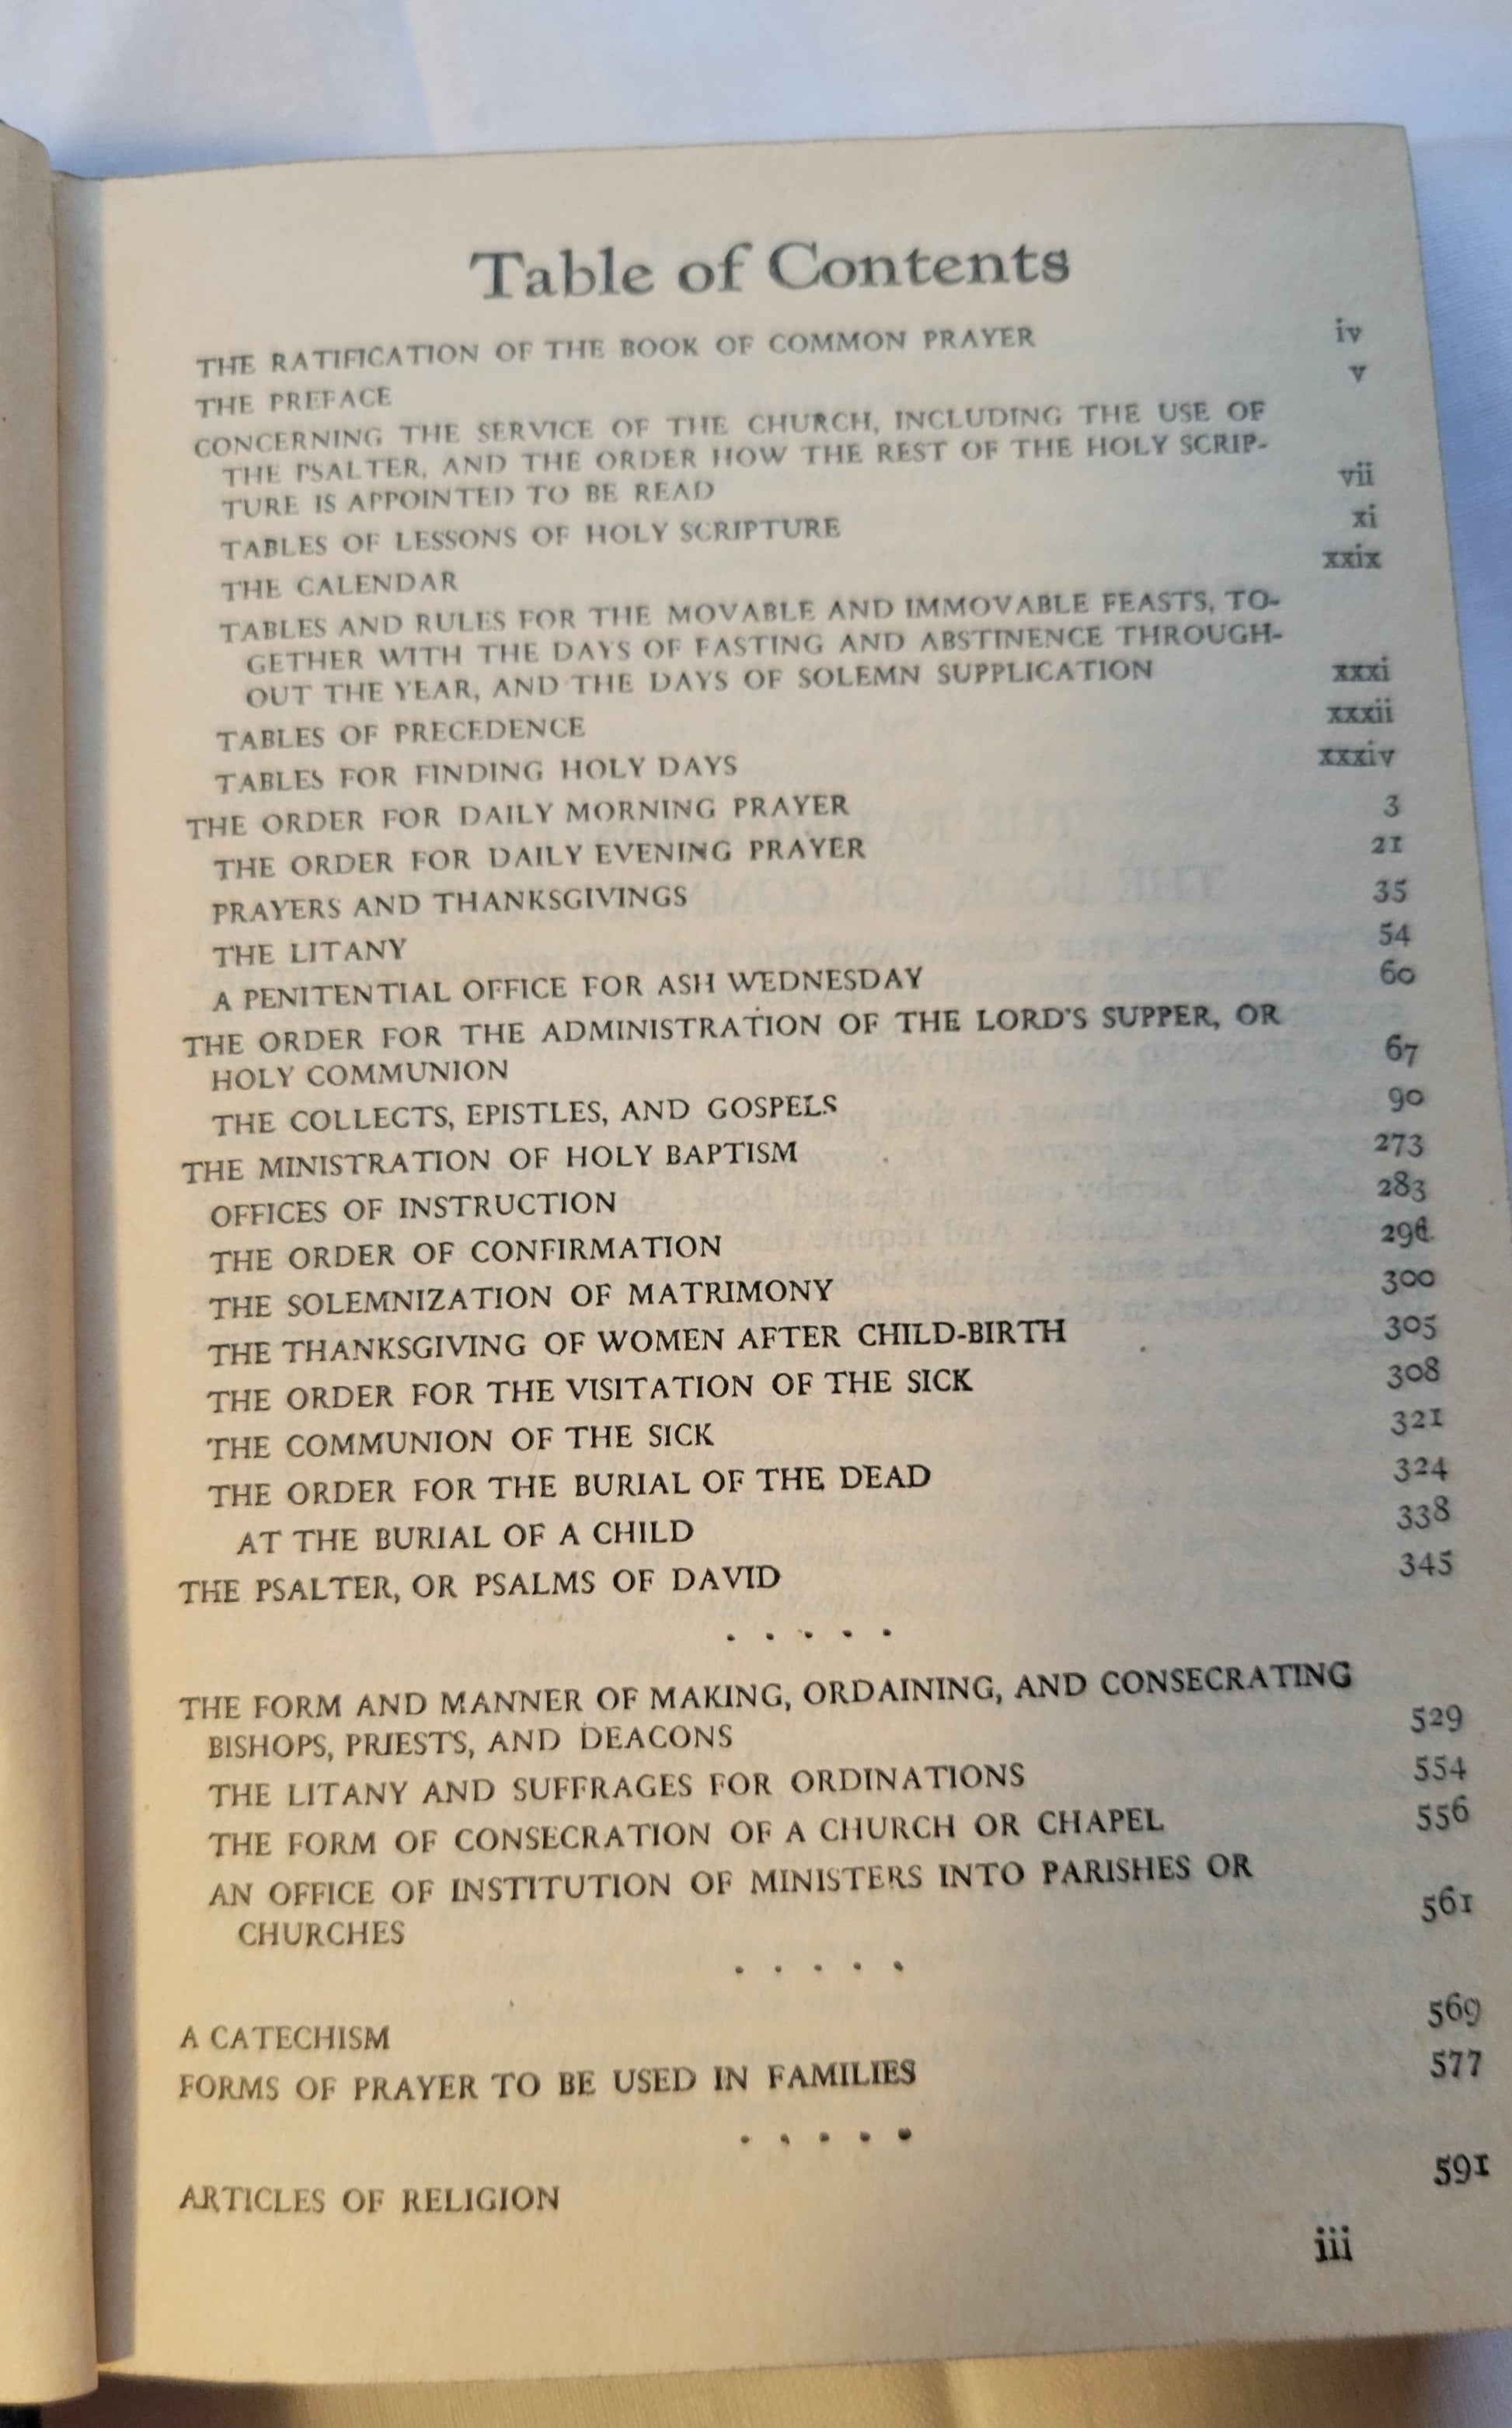  Antique book for sale "The Book of Common Prayer: And Administration of the Sacraments and Other Rites and Ceremonies of the Church: According to the Use of the Protestant Episcopal Church in the United States of America", published by Oxford University Press, 1929. Table of contents.